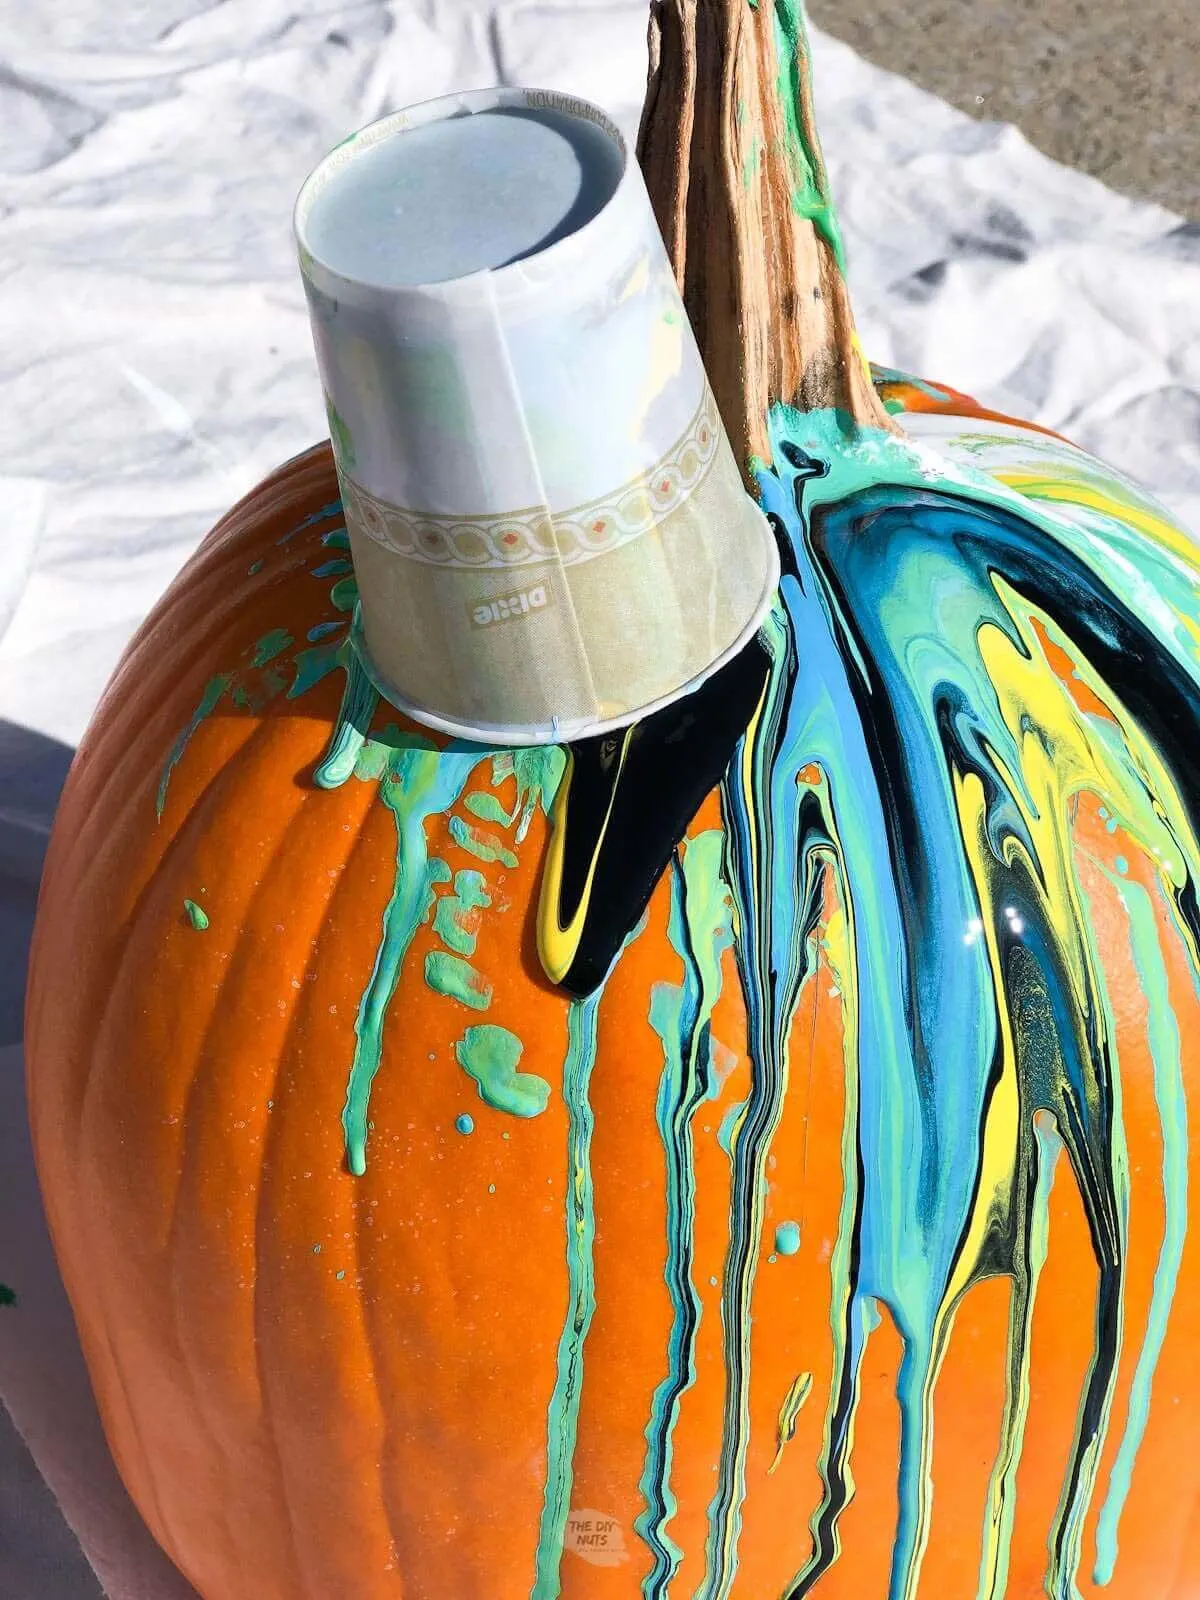 Cup left on pumpkin to pour paint on pumpkin to create a cool DIY painted pumpkin.